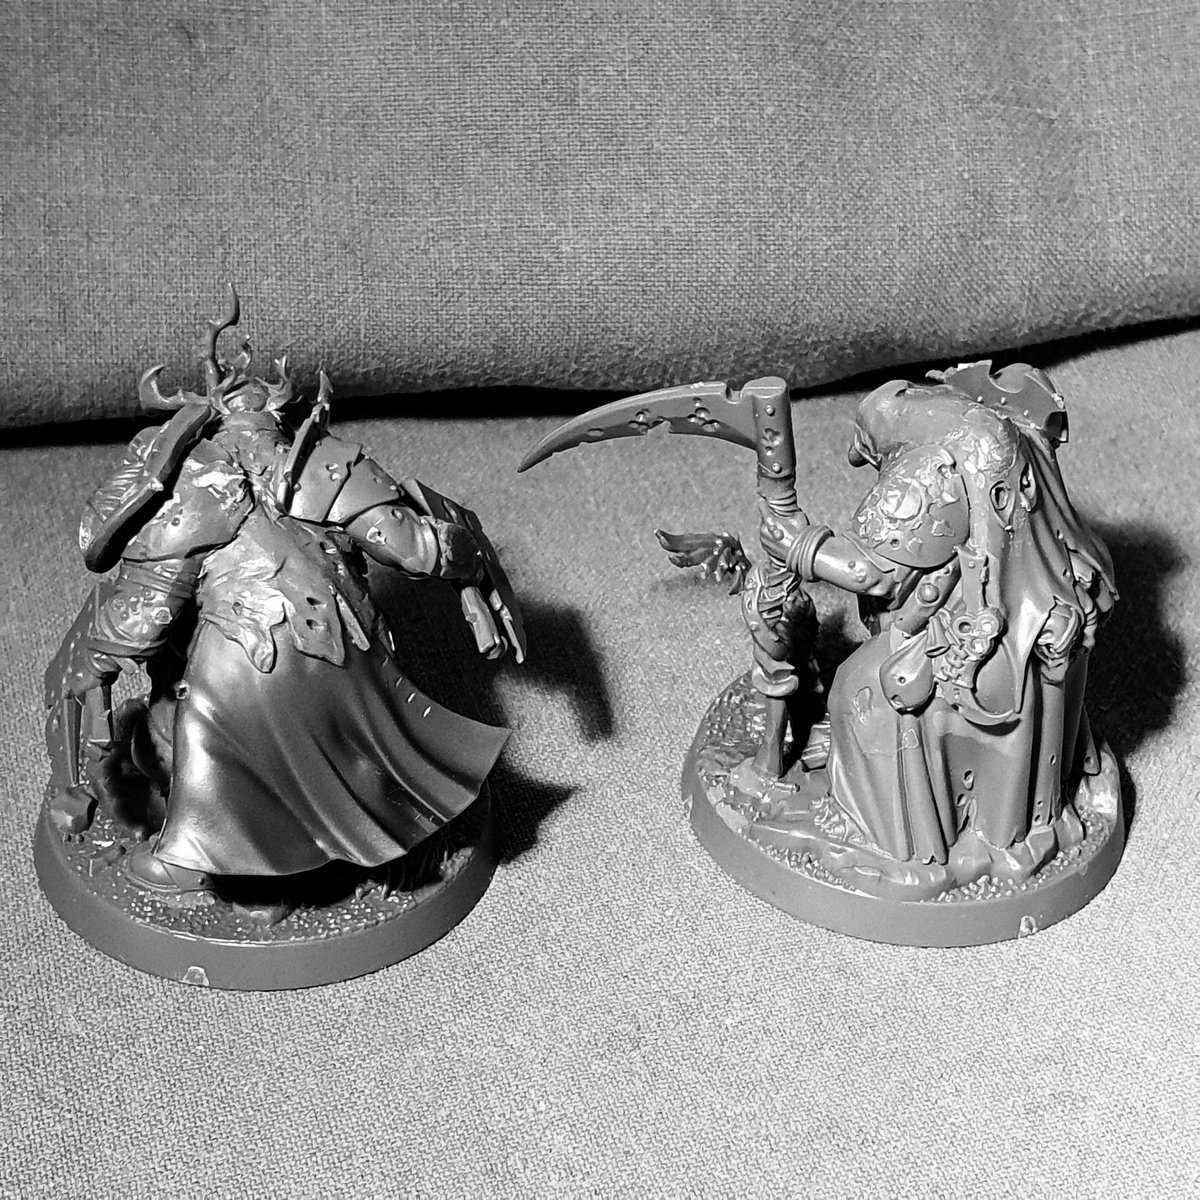 Vollak, The Traitor Knight.Klosolka, The Witch Knight. #SoulblightVampire